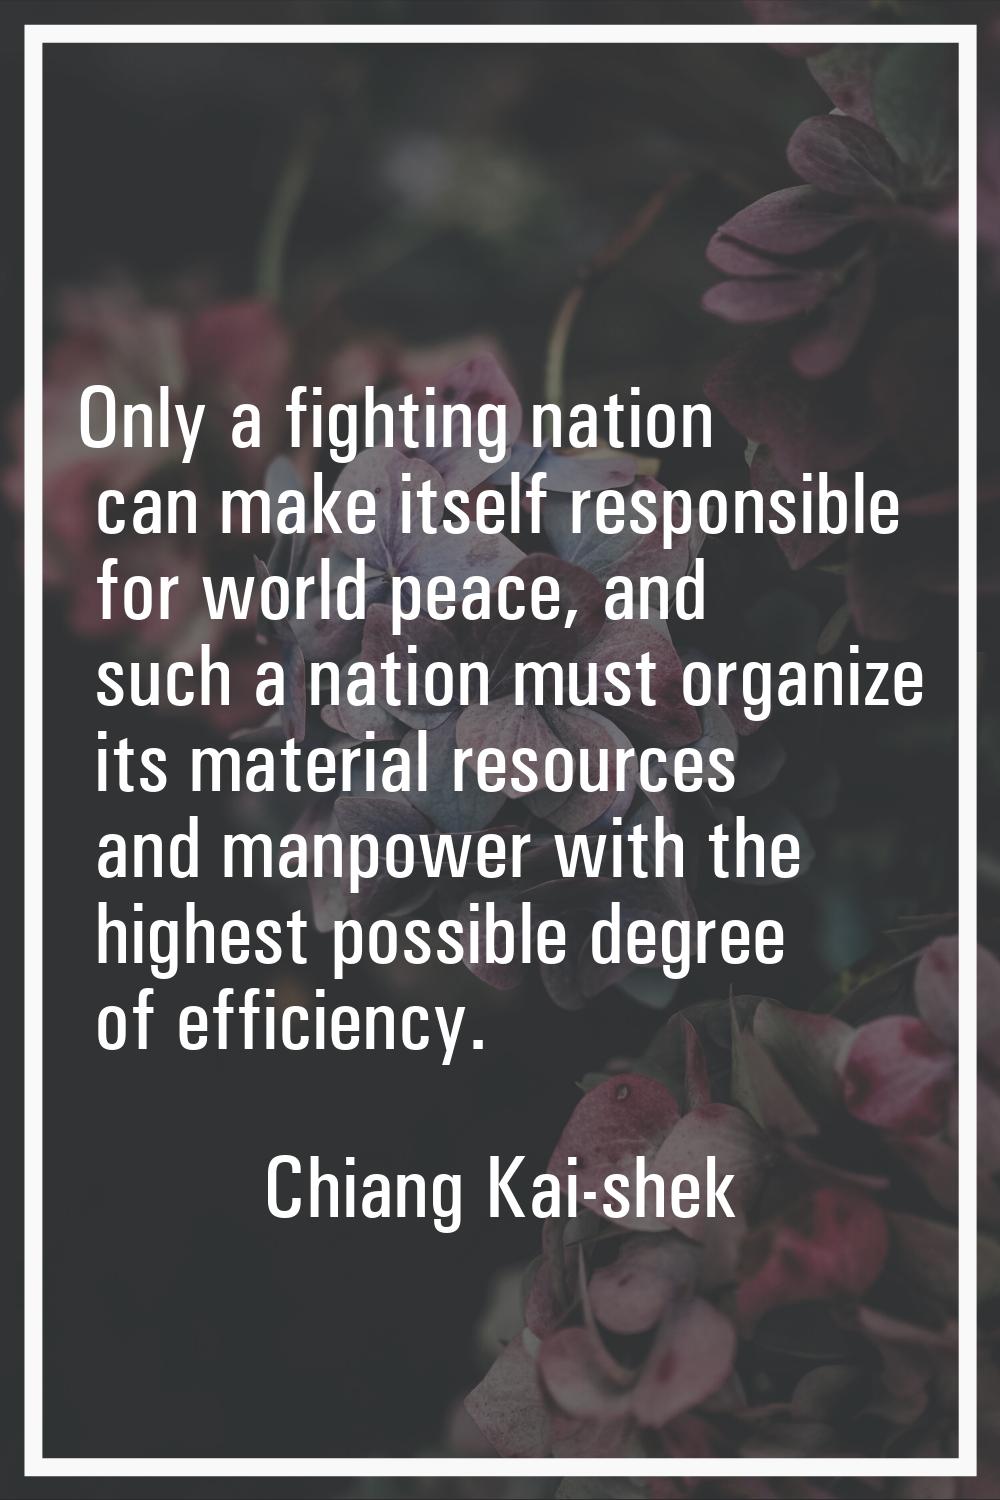 Only a fighting nation can make itself responsible for world peace, and such a nation must organize